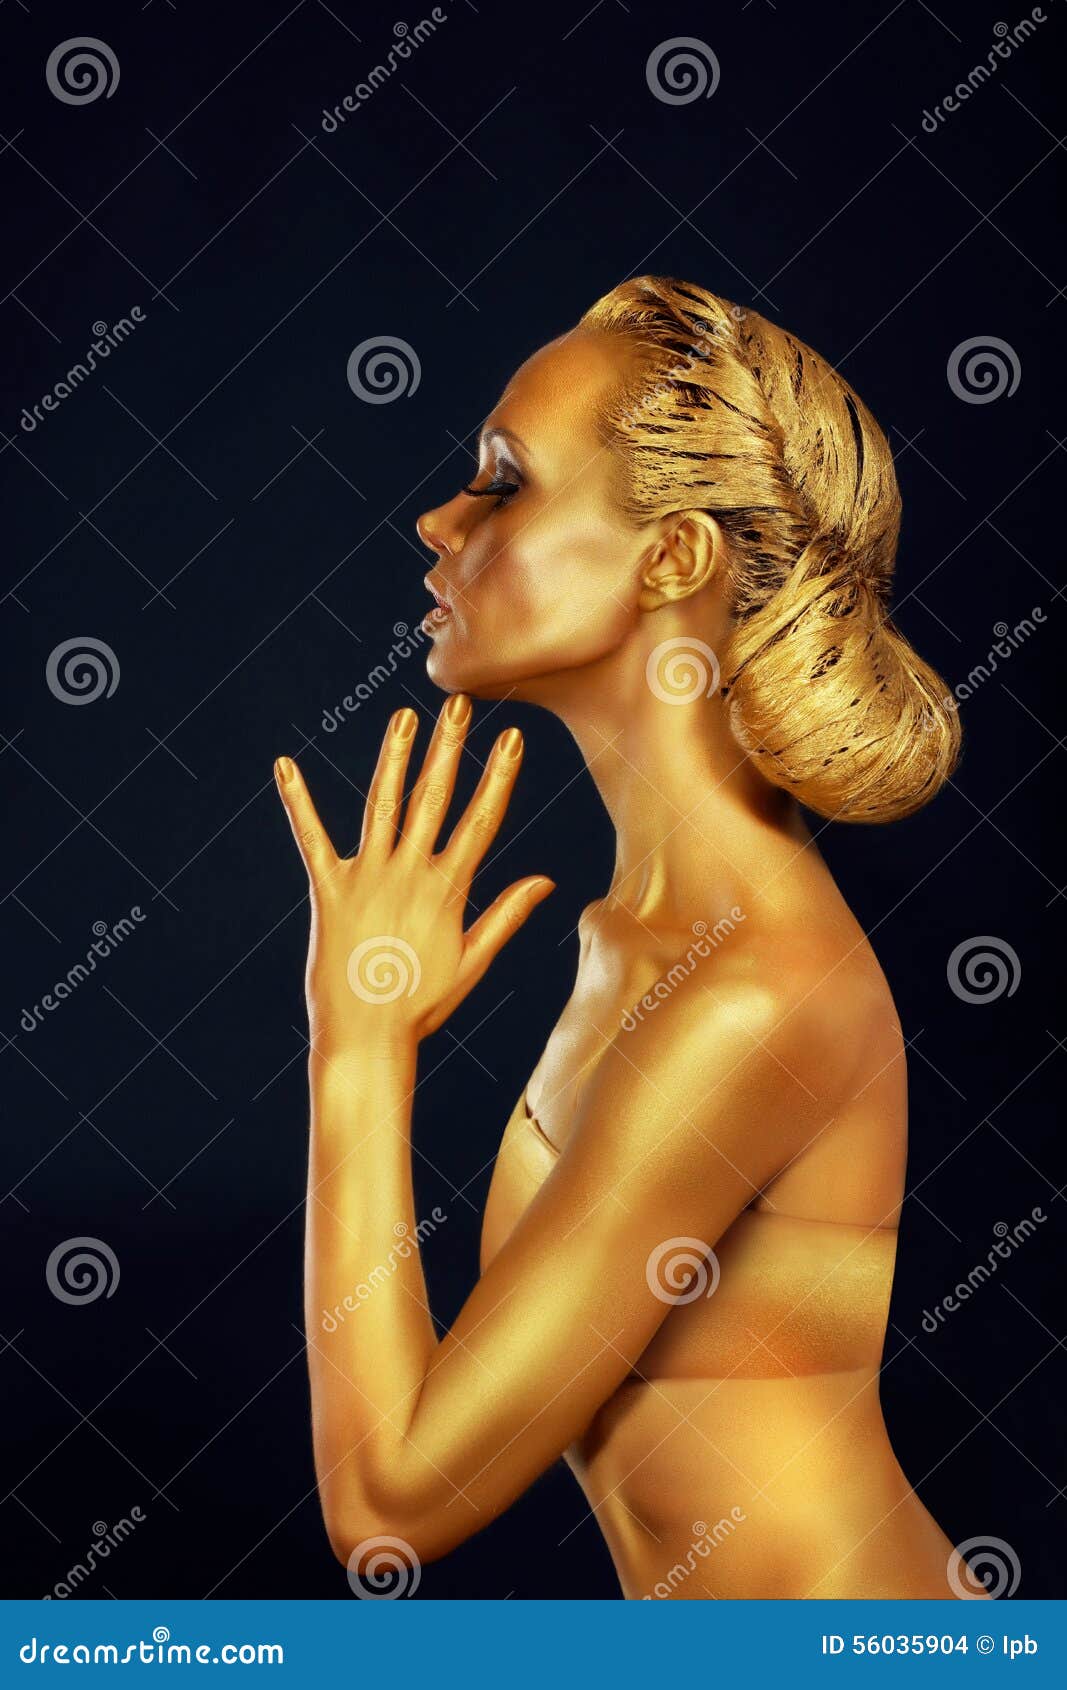 Body Art. Woman painting Body with Paint Brush in Golden Color